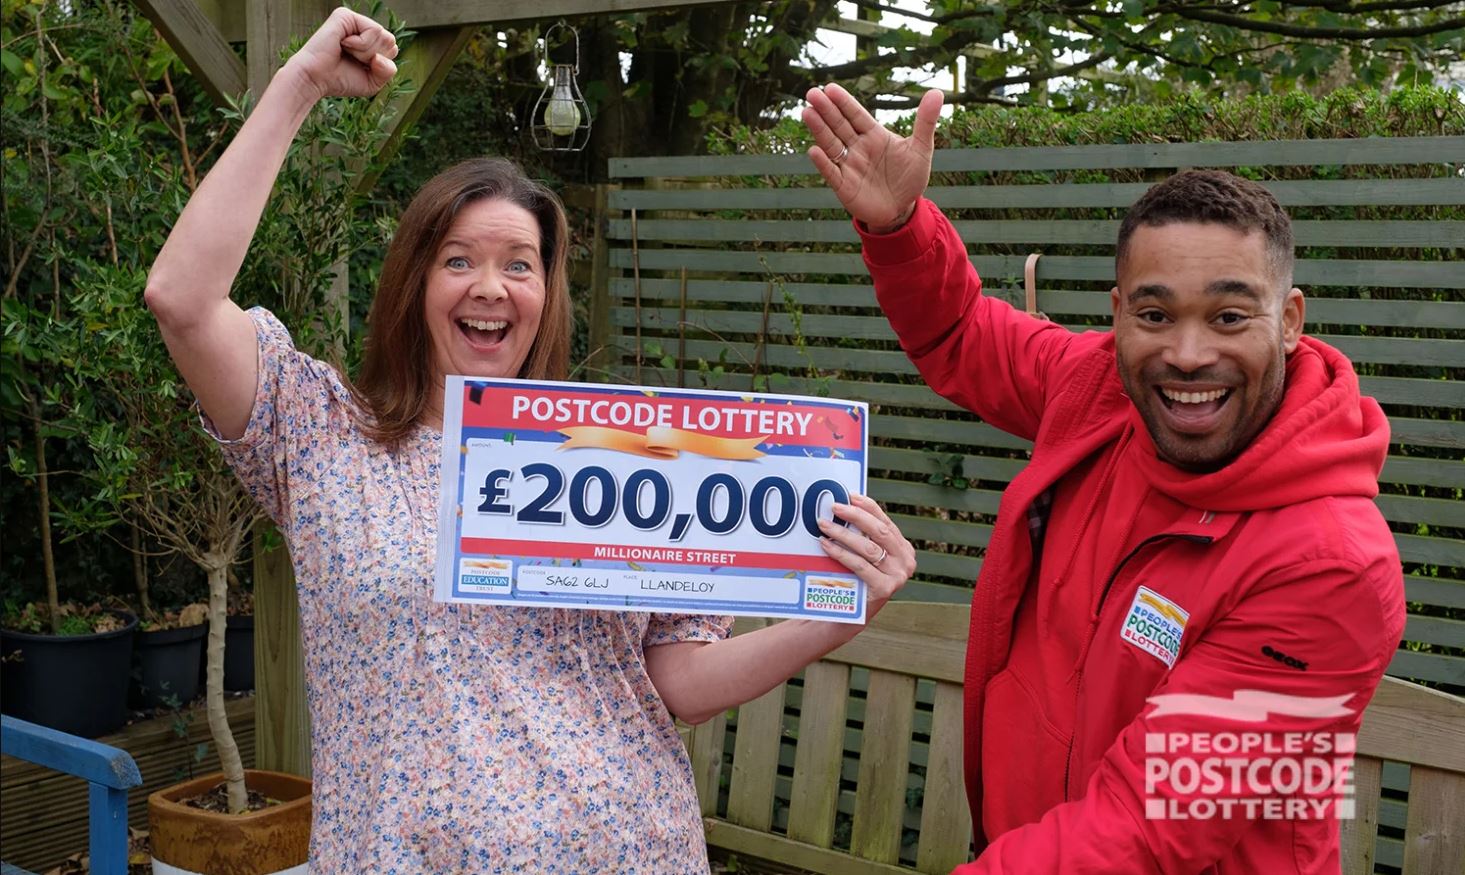 Maria won £200,000 in the Postcode Lottery but kept it hidden from her husband